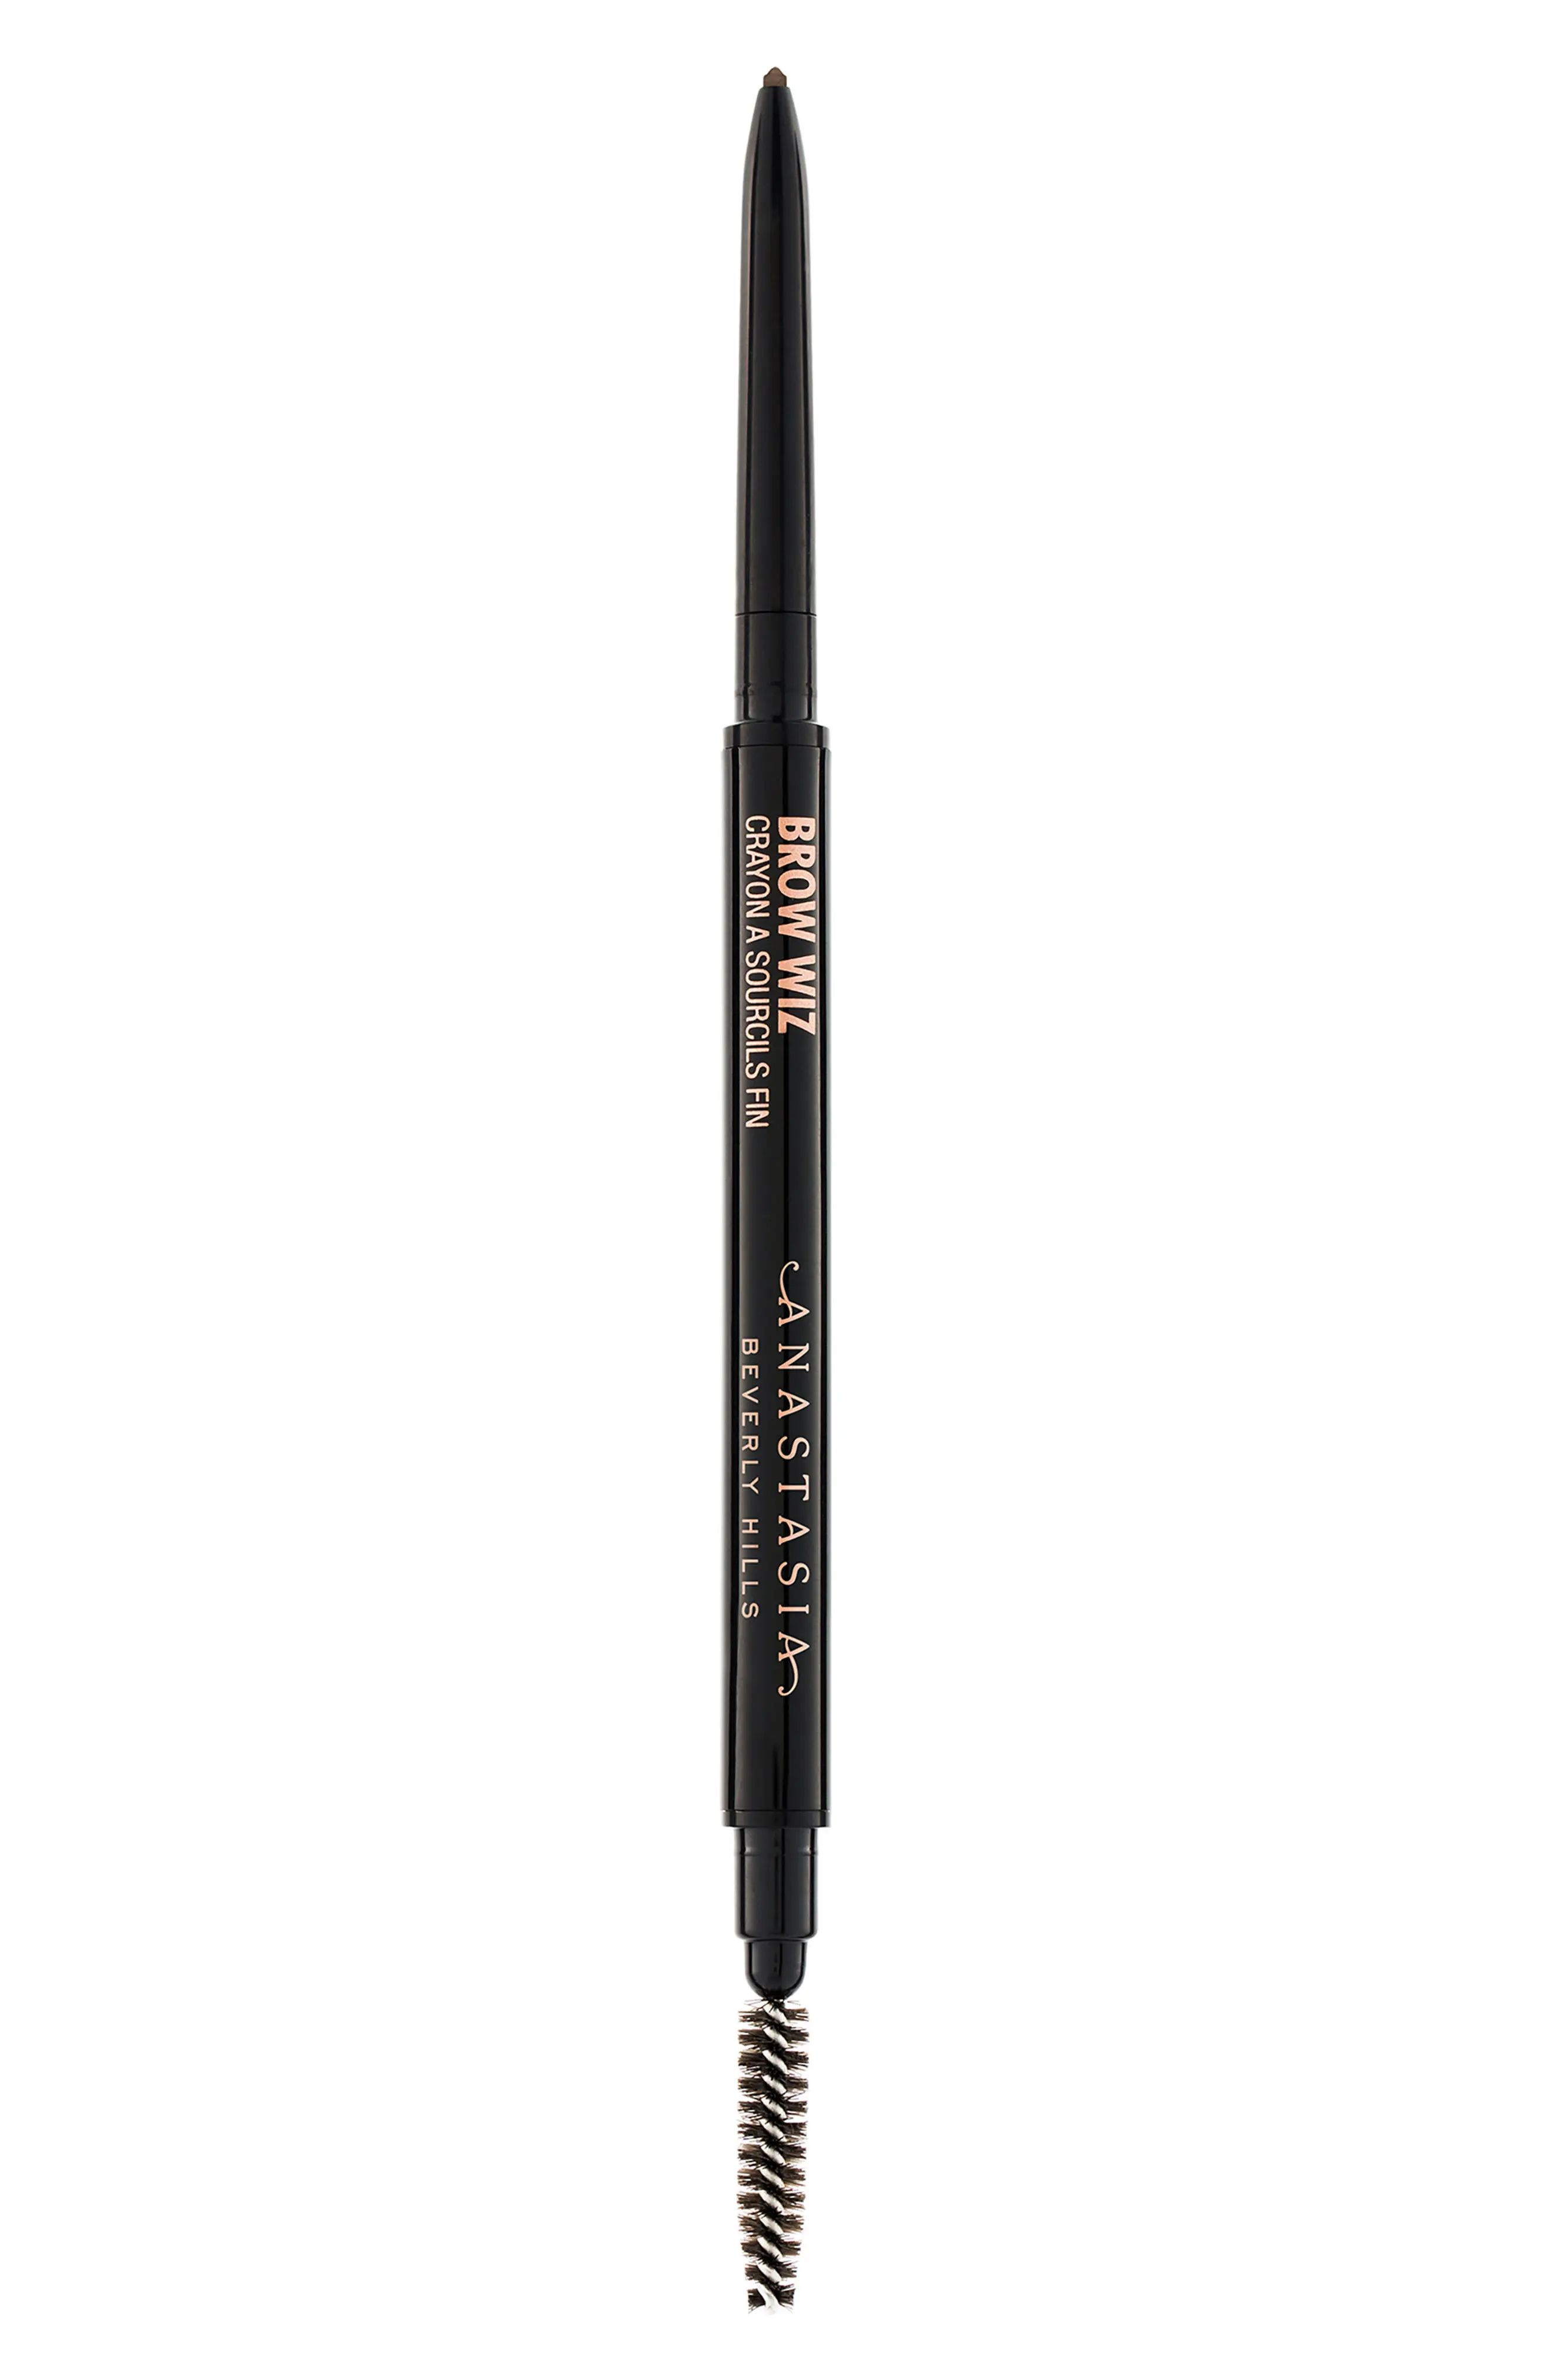 Anastasia Beverly Hills Brow Wiz Mechanical Brow Pencil in Taupe (Ash Blonde) at Nordstrom | Nordstrom